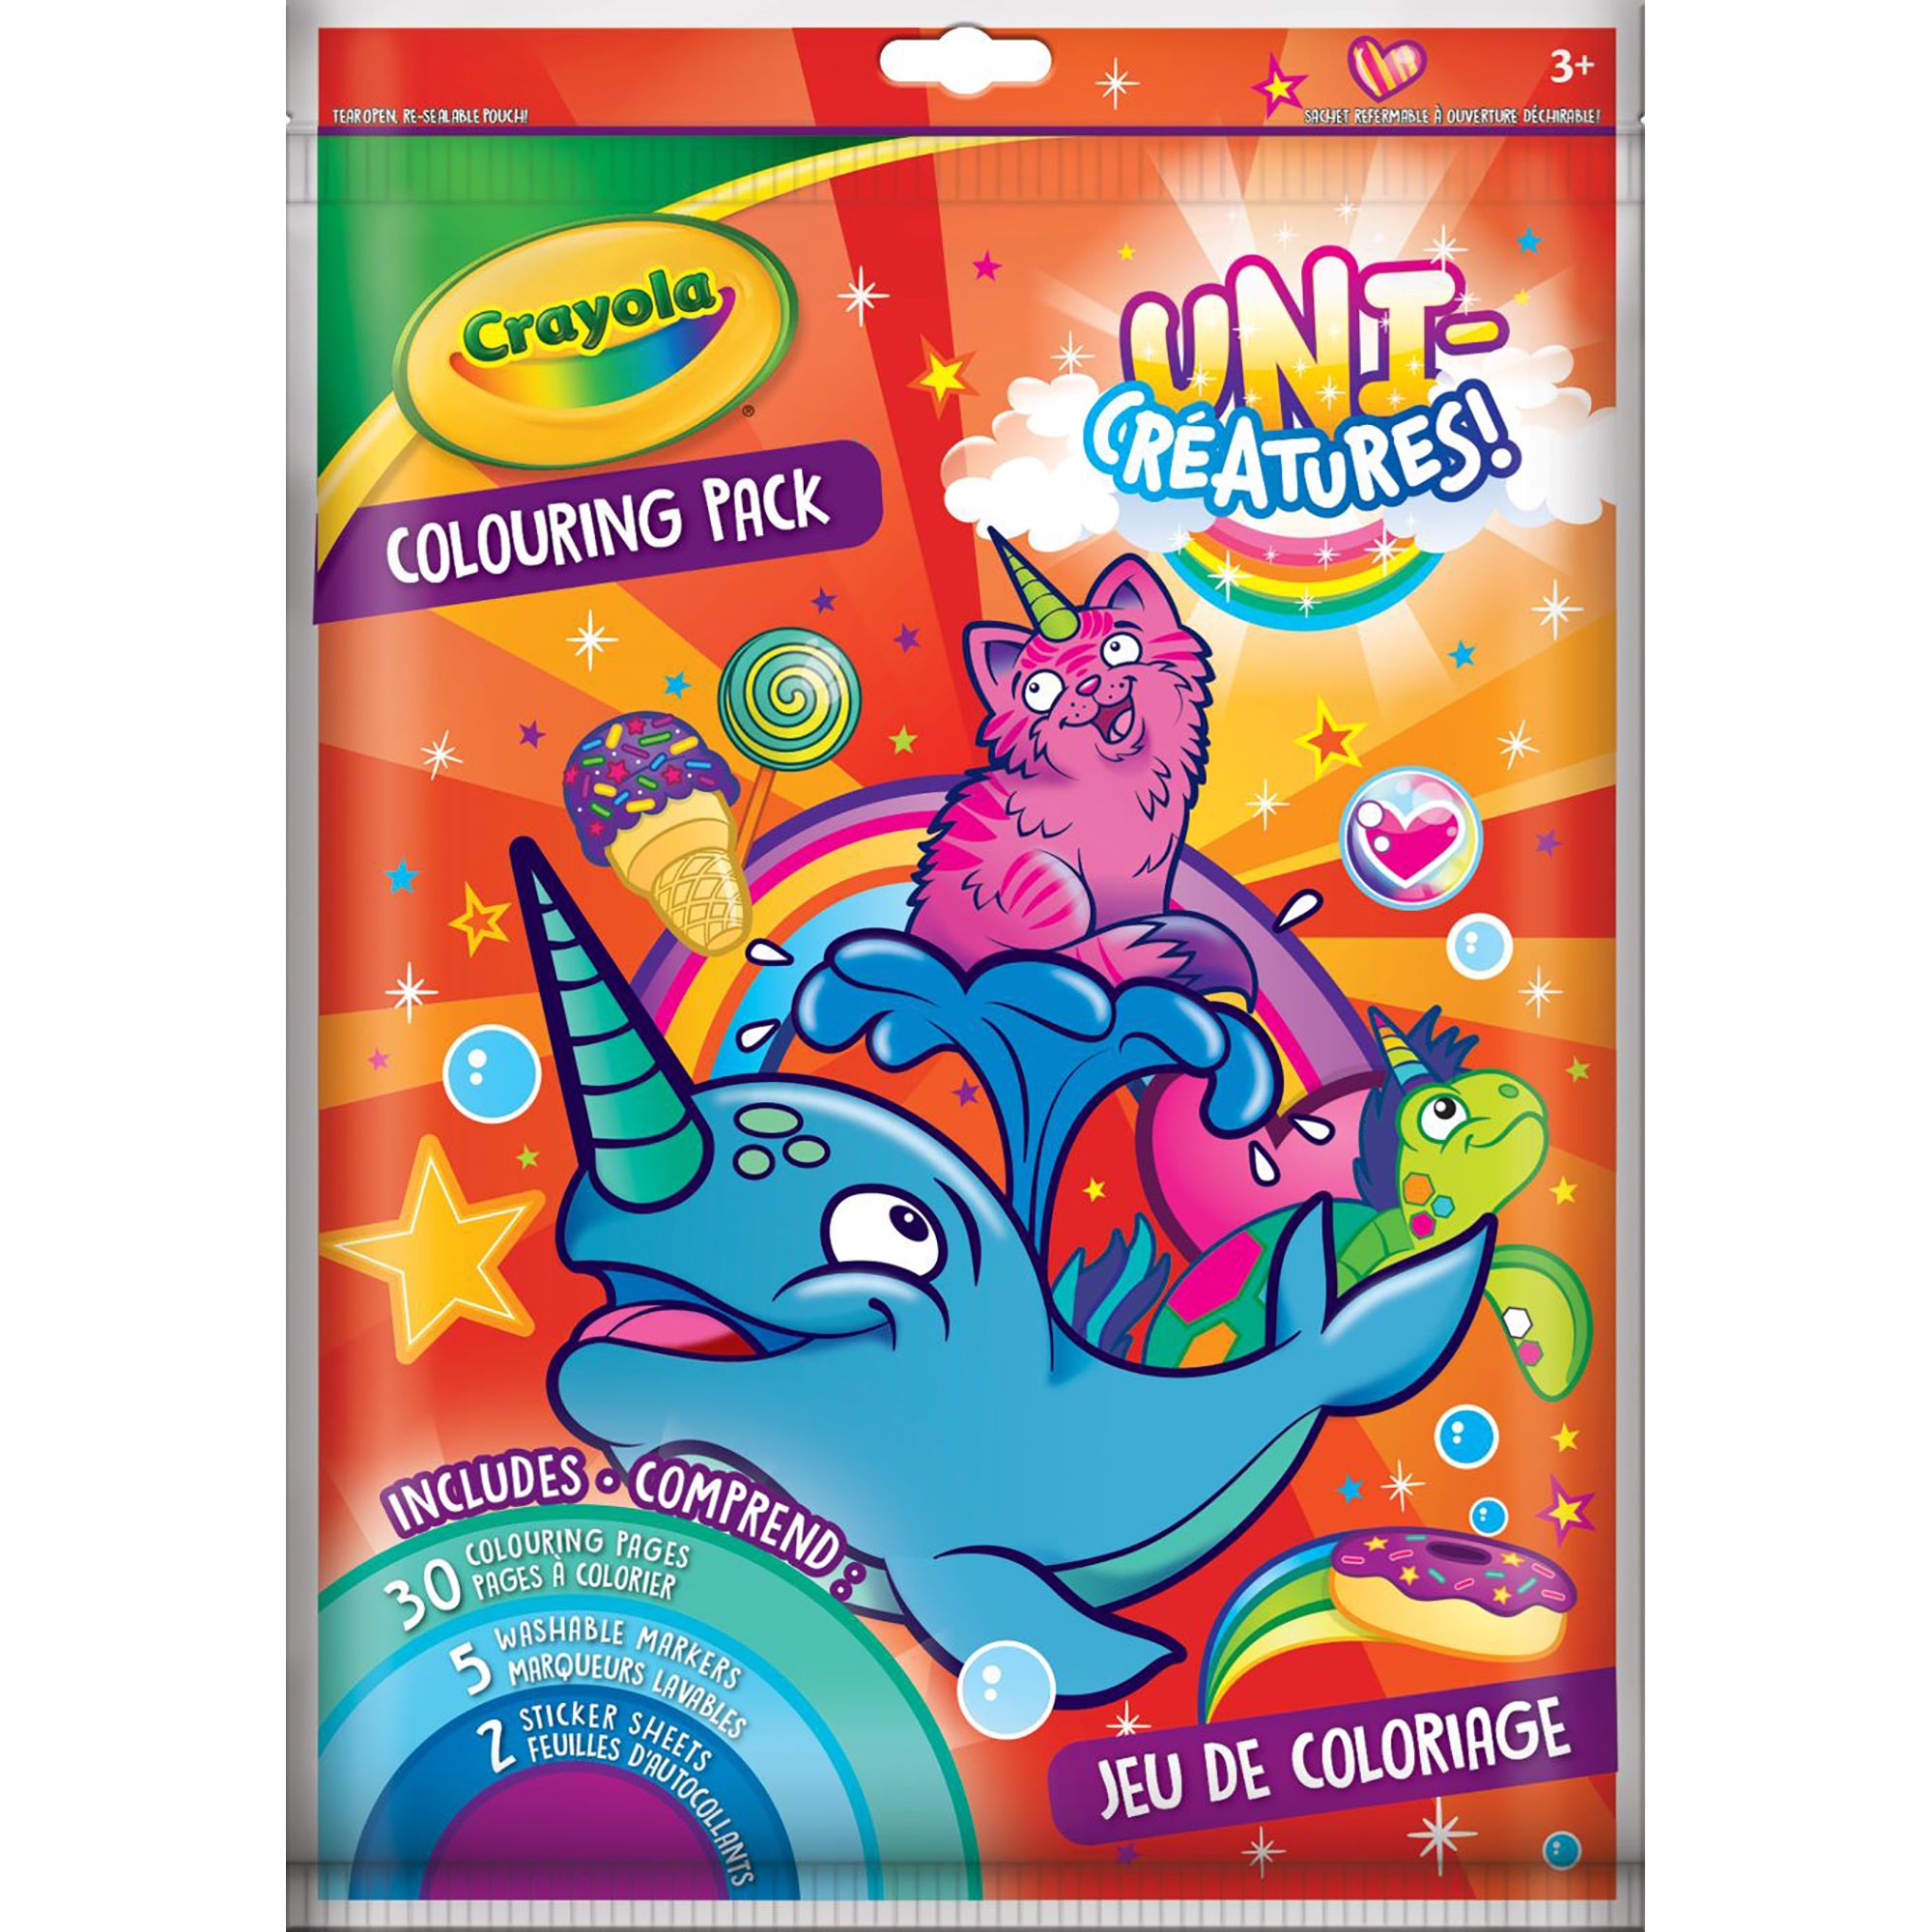 Crayola Coloring Pack with 5 Markers and Stickers 8.5x11in